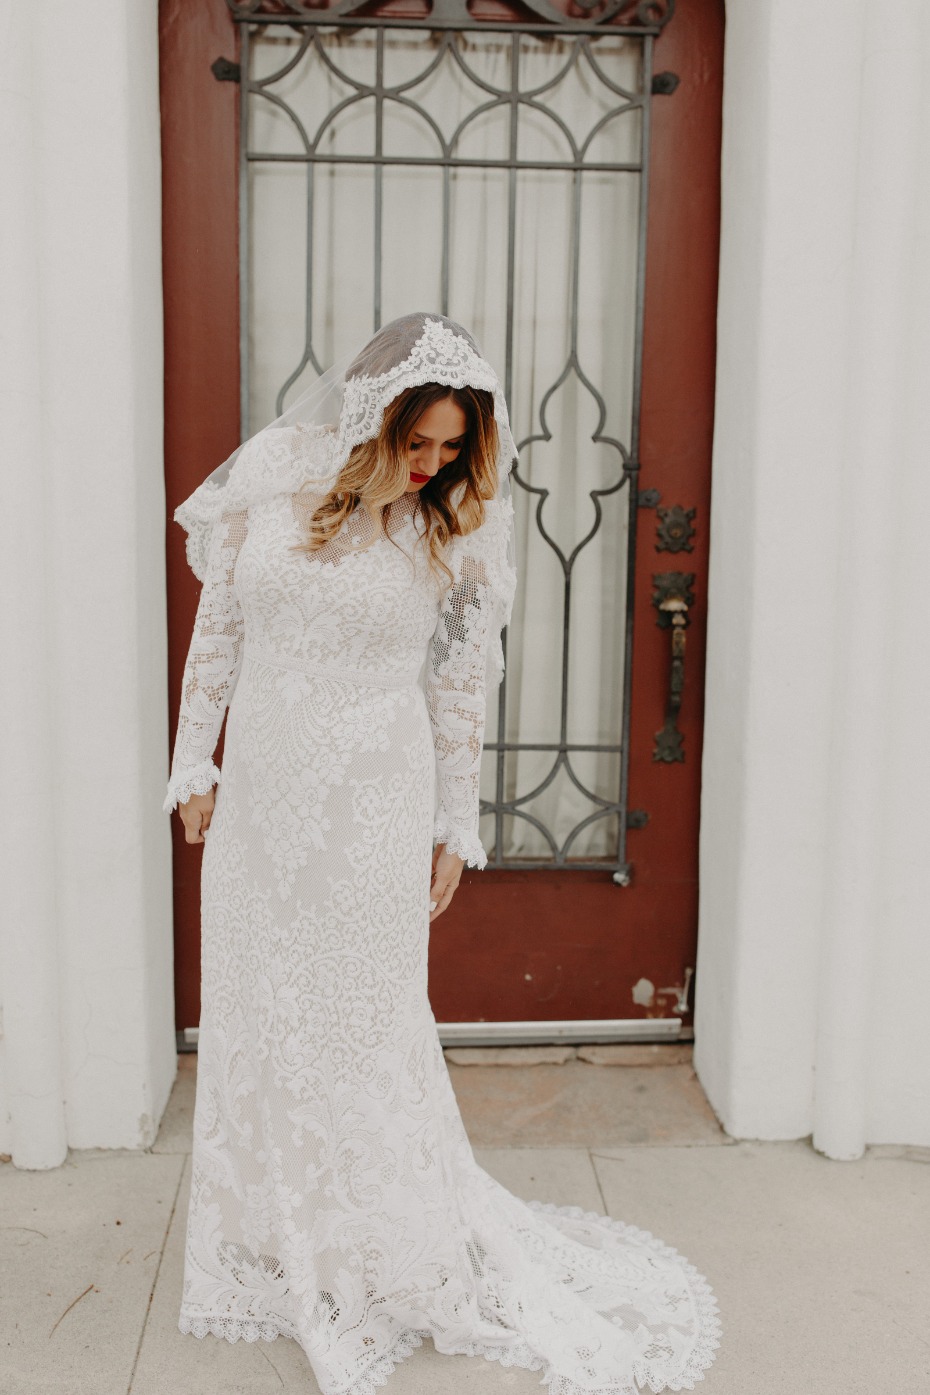 Bride standing with dress fanned out and curls in her hair